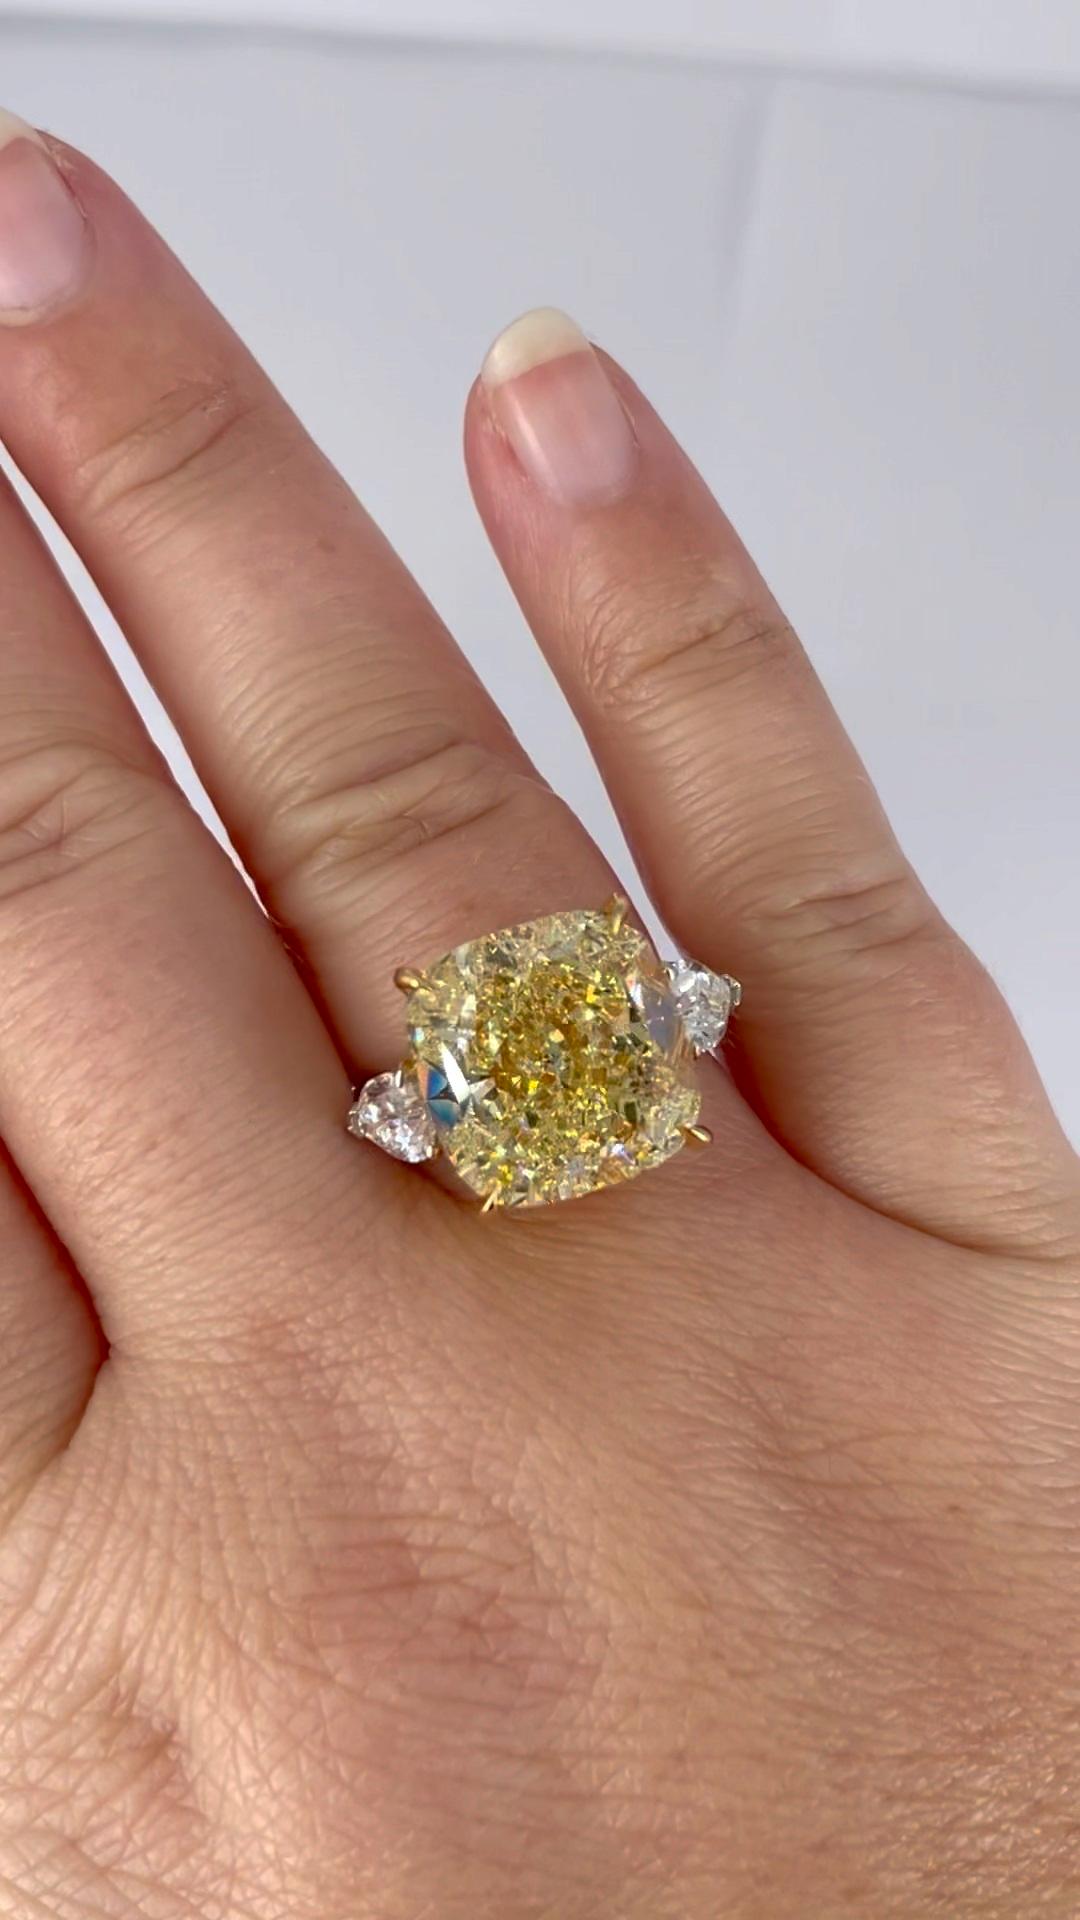 J. Birnbach 13.05 ct GIA Fancy Yellow Cushion Diamond Ring with Pear Side Stones In New Condition For Sale In New York, NY